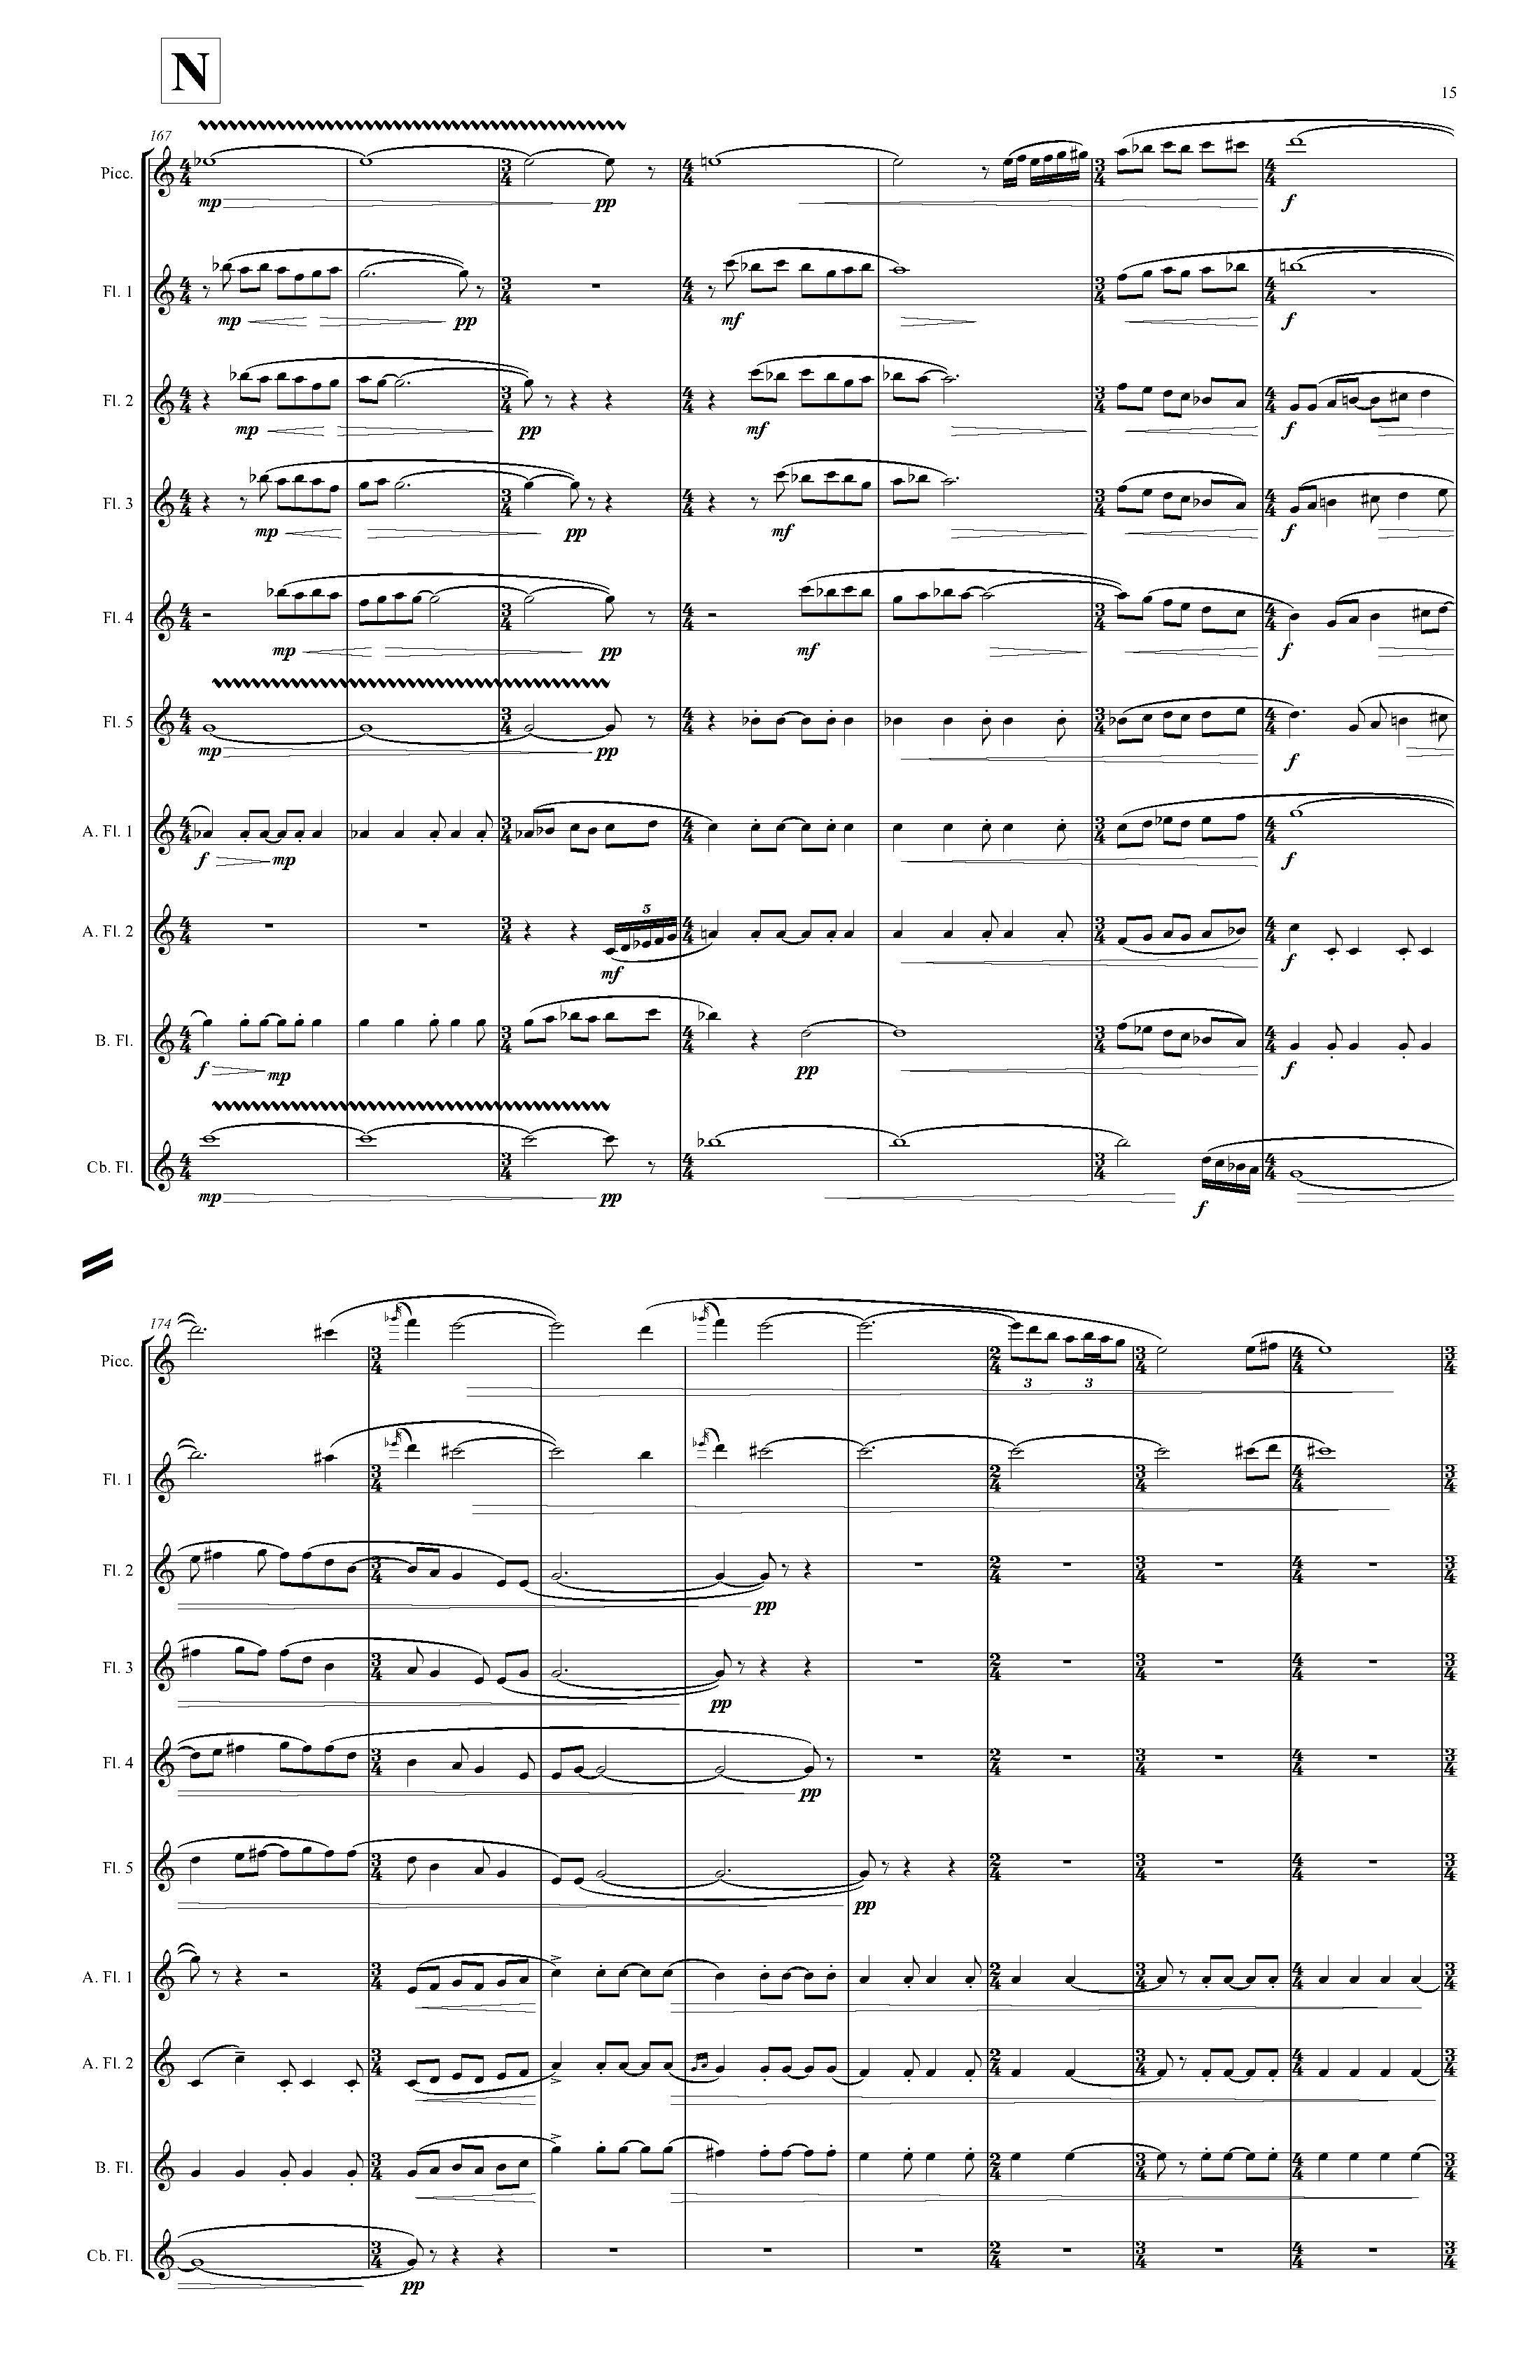 PIPES - Complete Score_Page_21.jpg